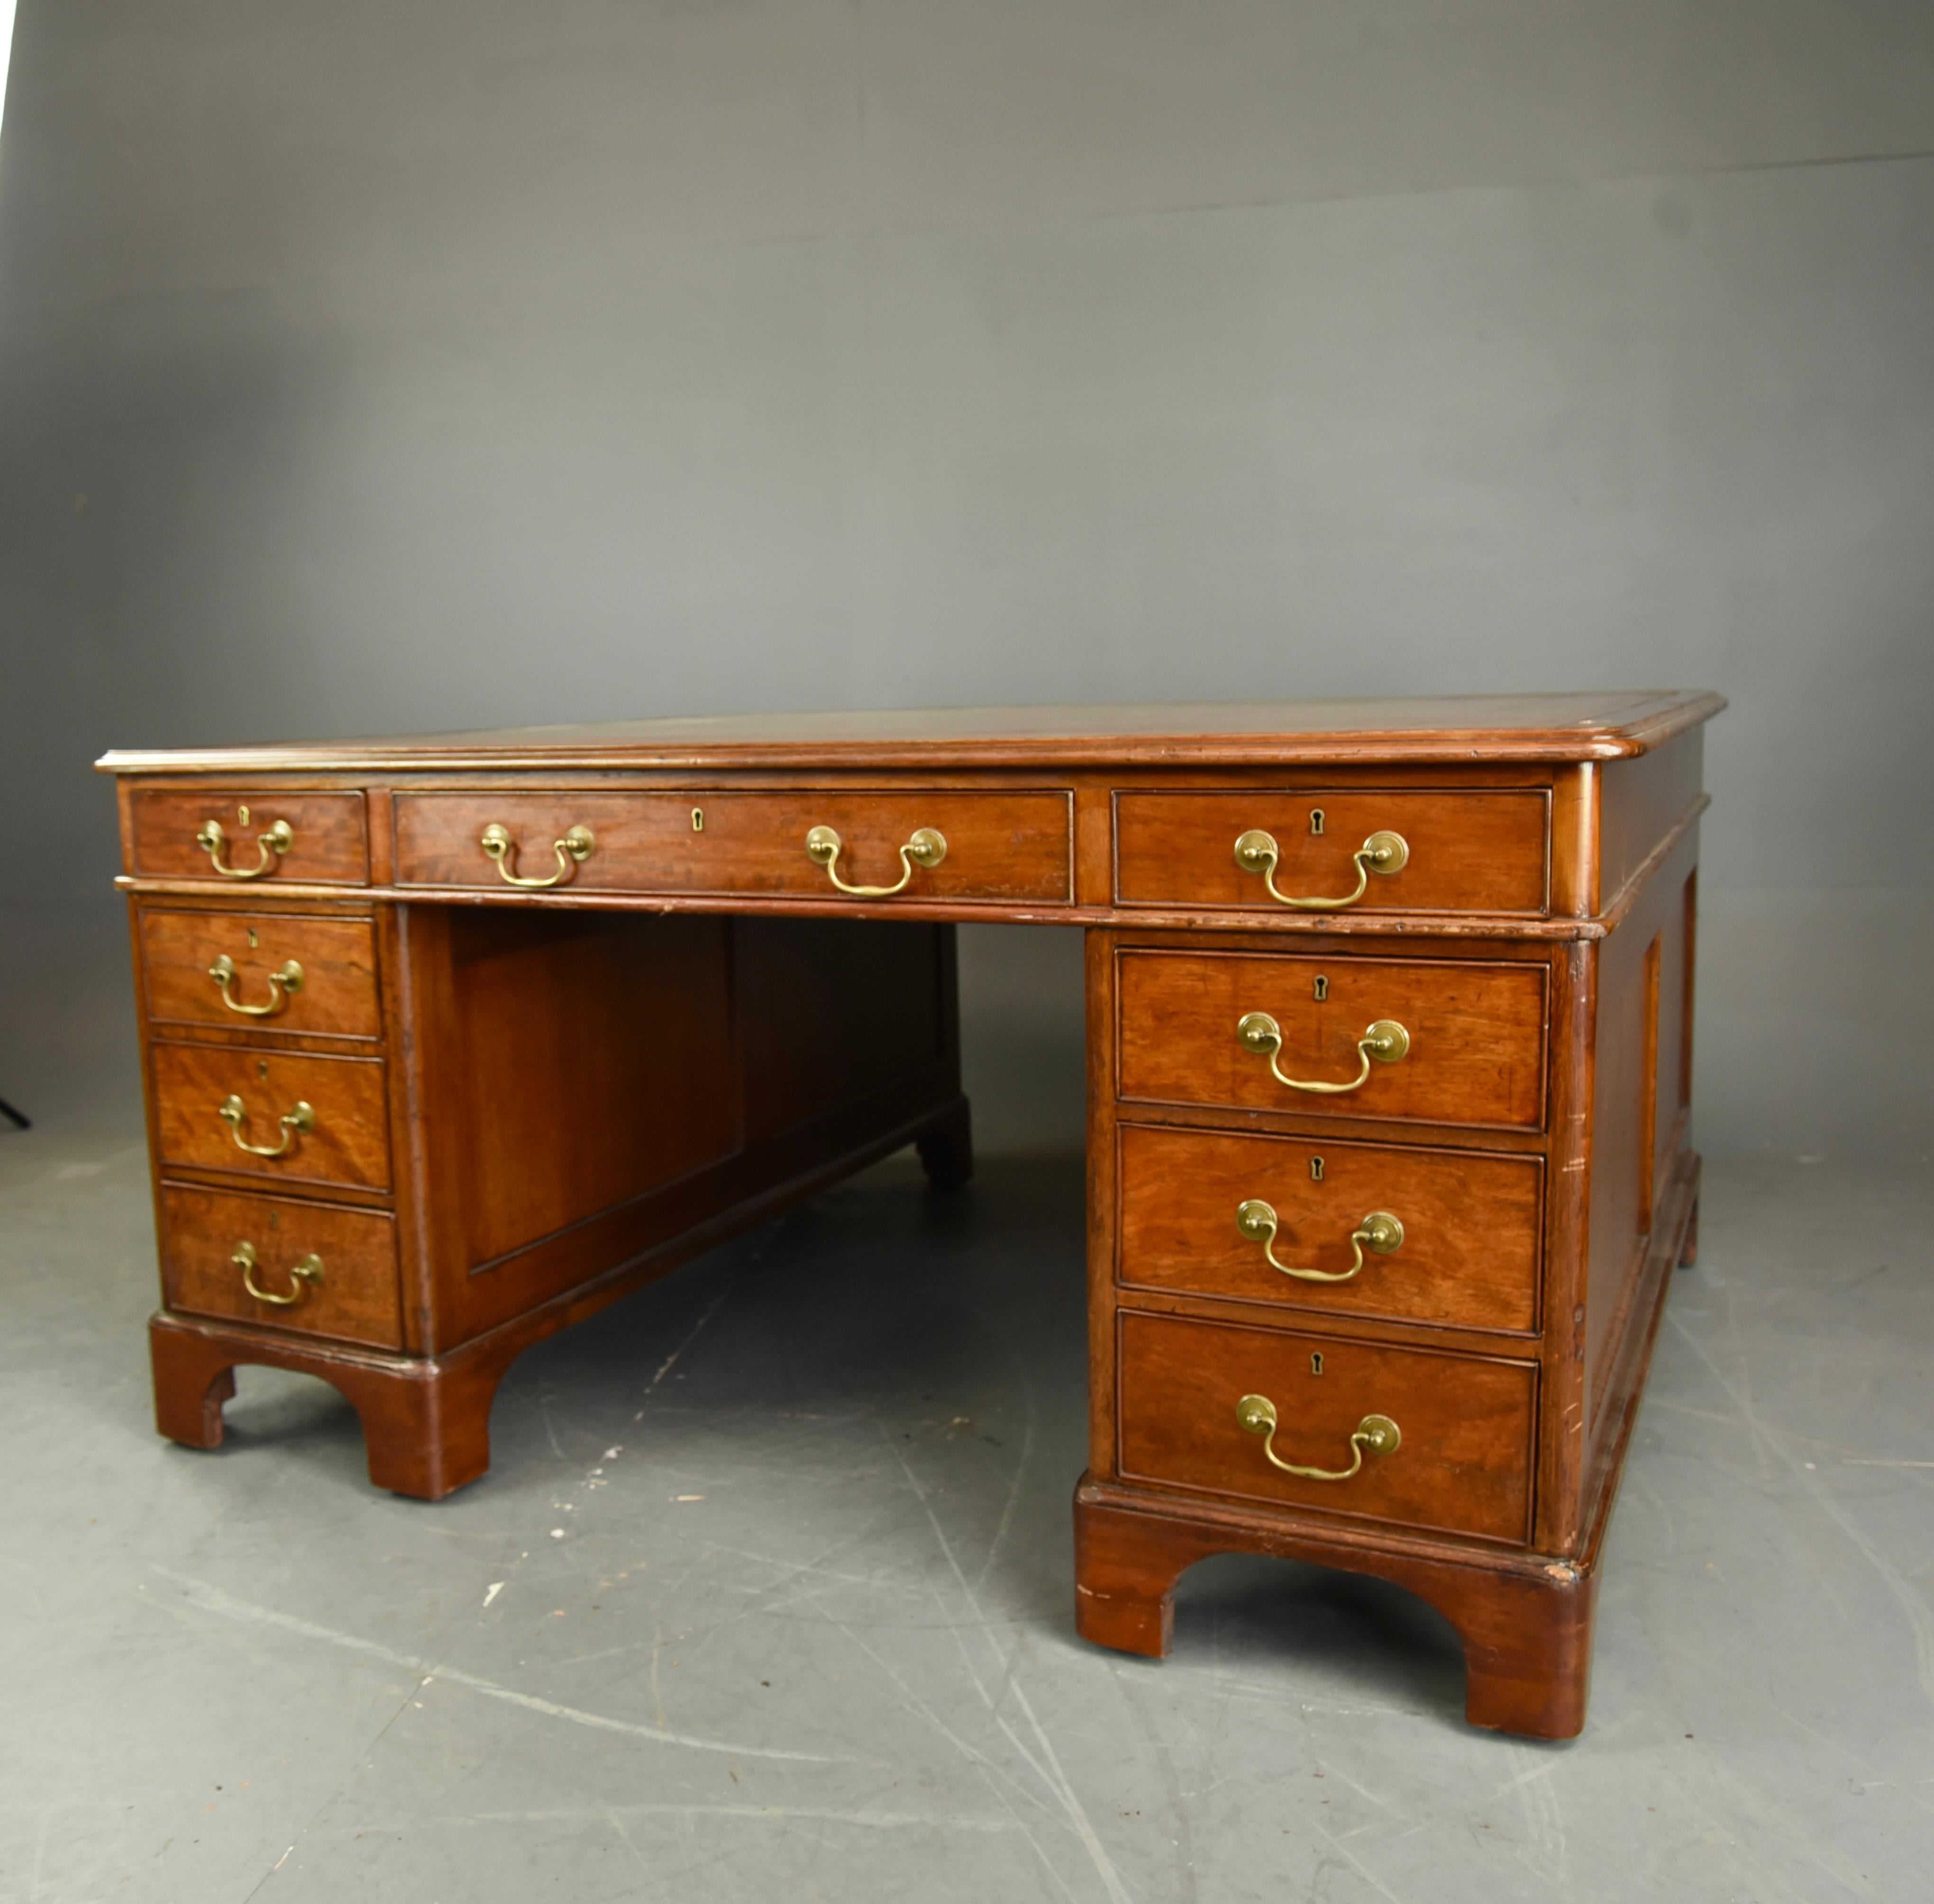 A fantastic large Victorian mahogany partners desk .
The desk has18 drawers in total  9 each side that all slide nice and smooth as they should they are all solid mahogany lined with fine hand dovetails .
The has a wonderful colour and grain with a